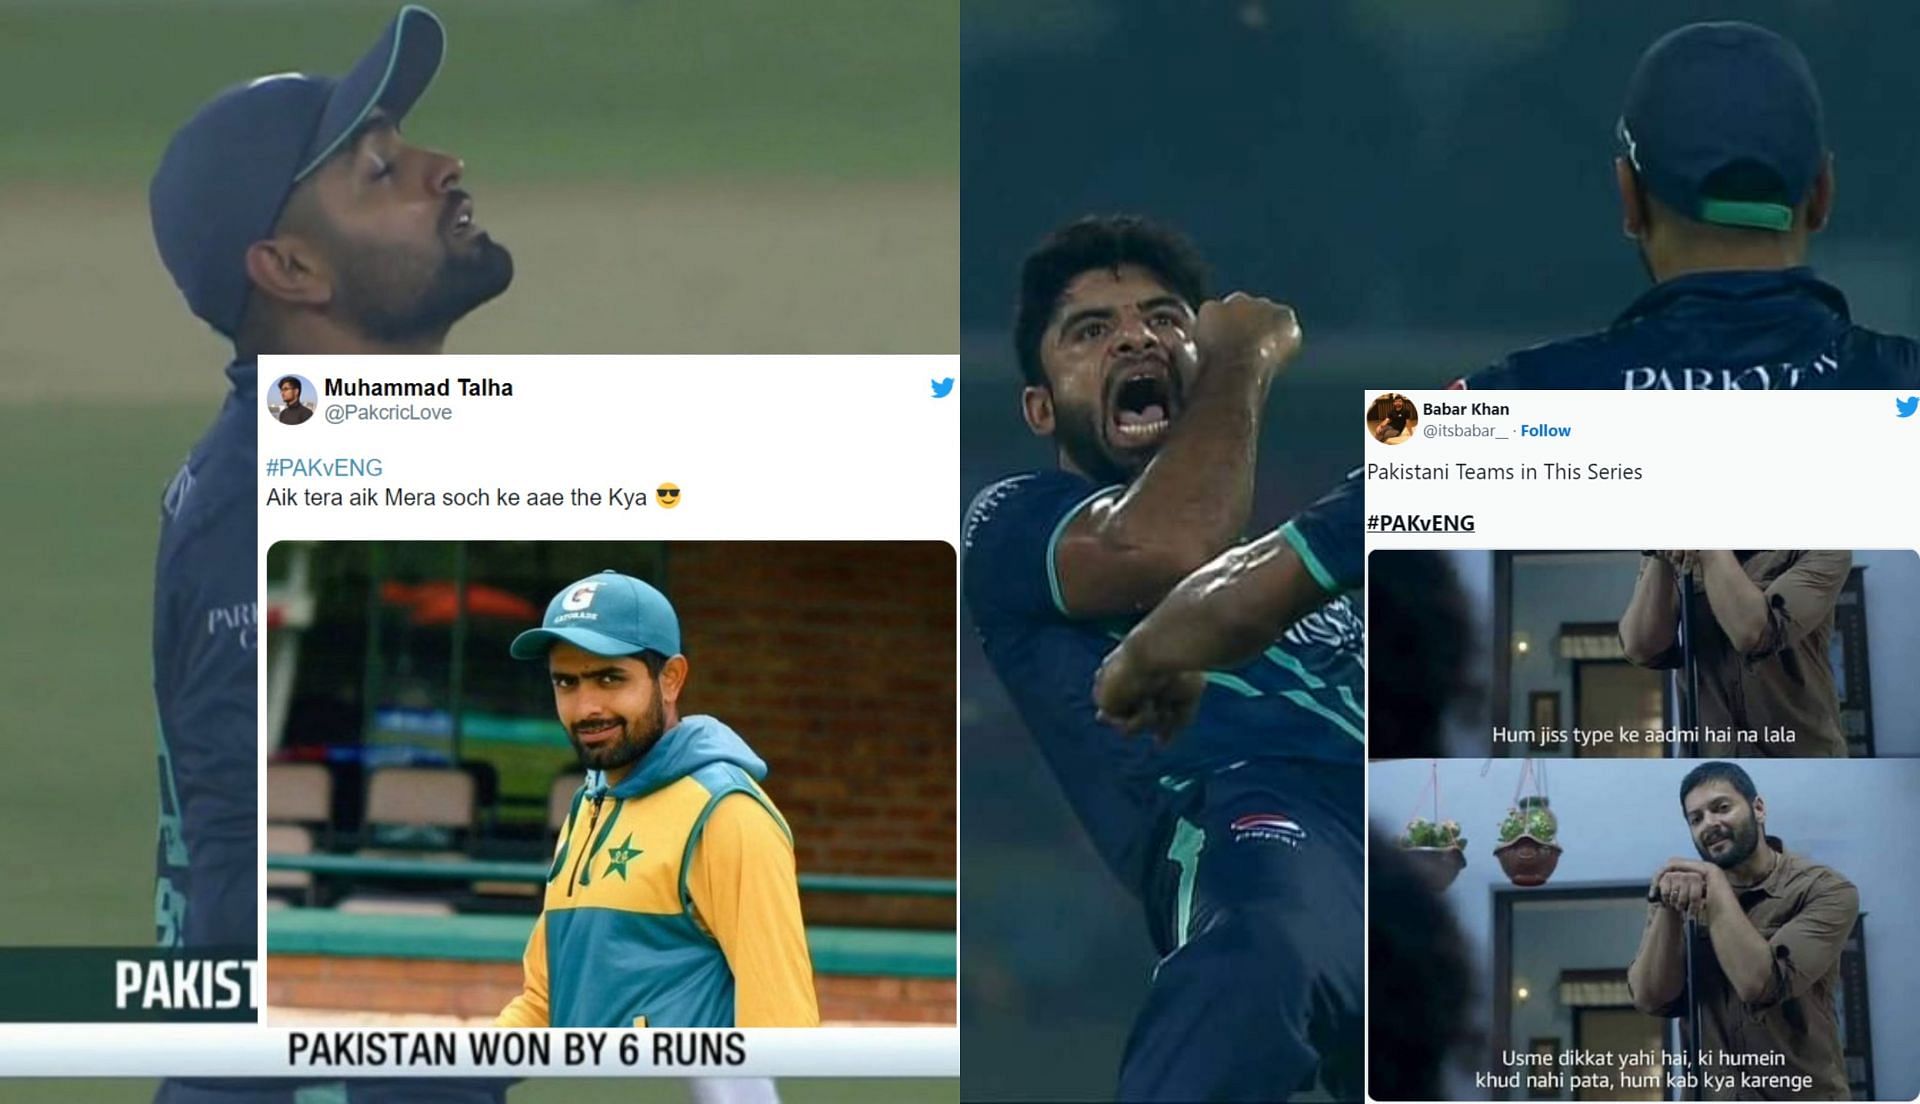 Fans took to social media to share memes after England lost against Pakistan on Wednesday